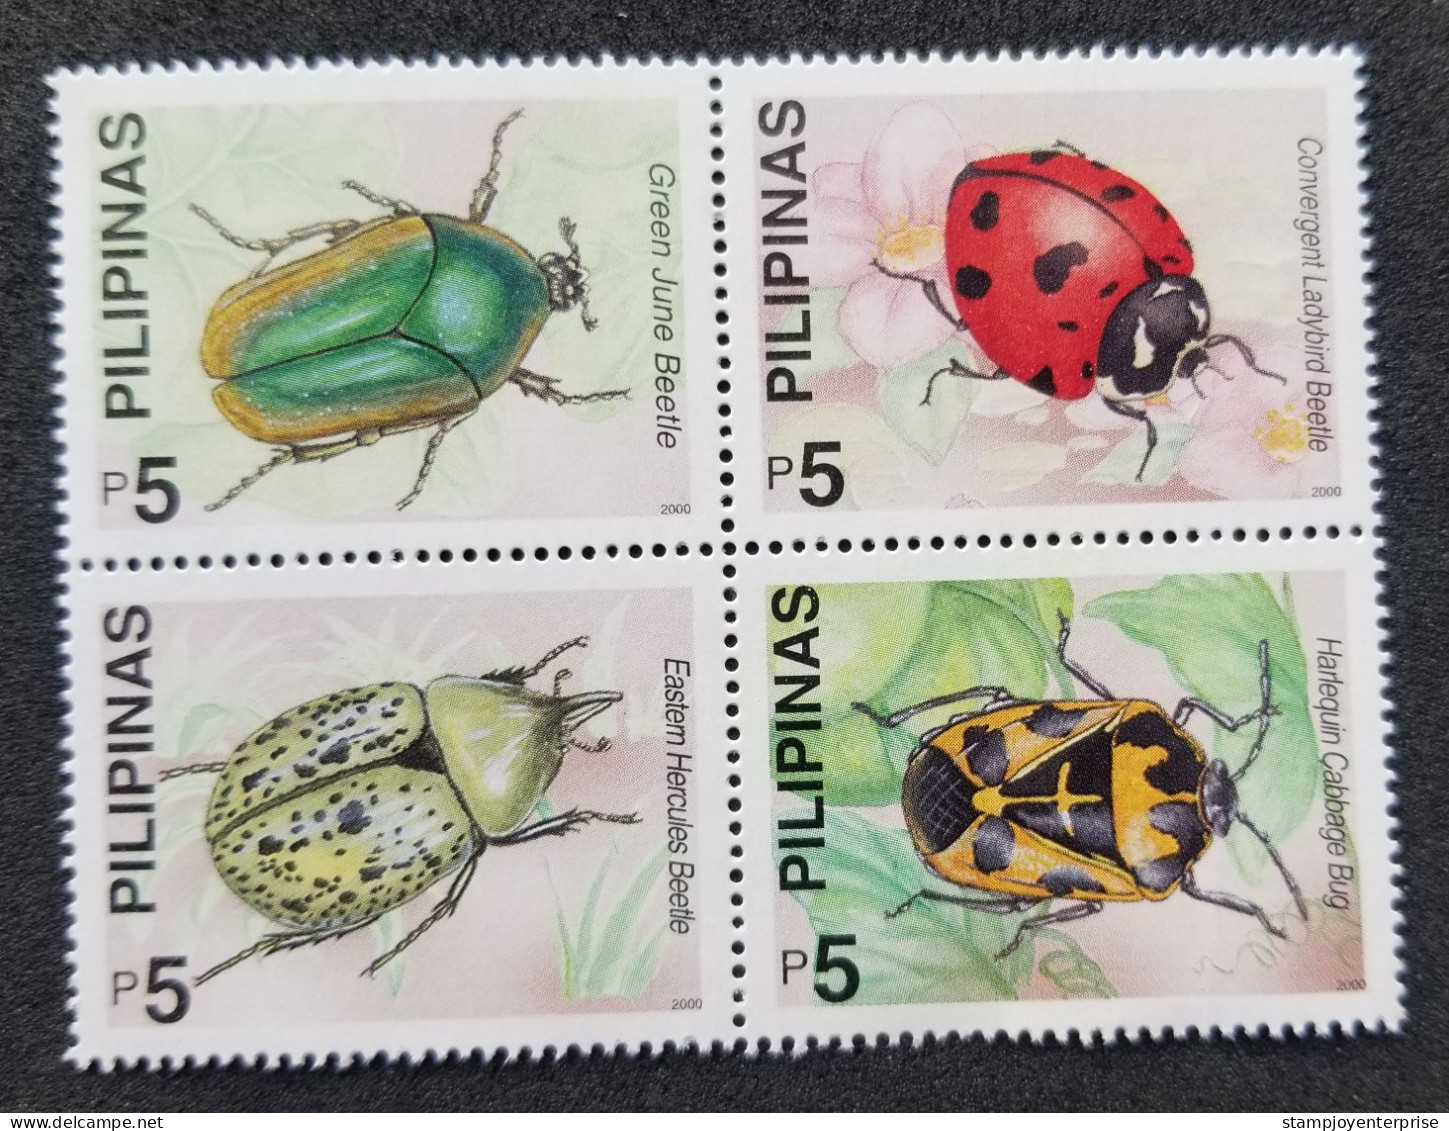 Philippines Insects 2000 Beetles Bug Ladybird Insect Beetle (stamp) MNH - Filipinas